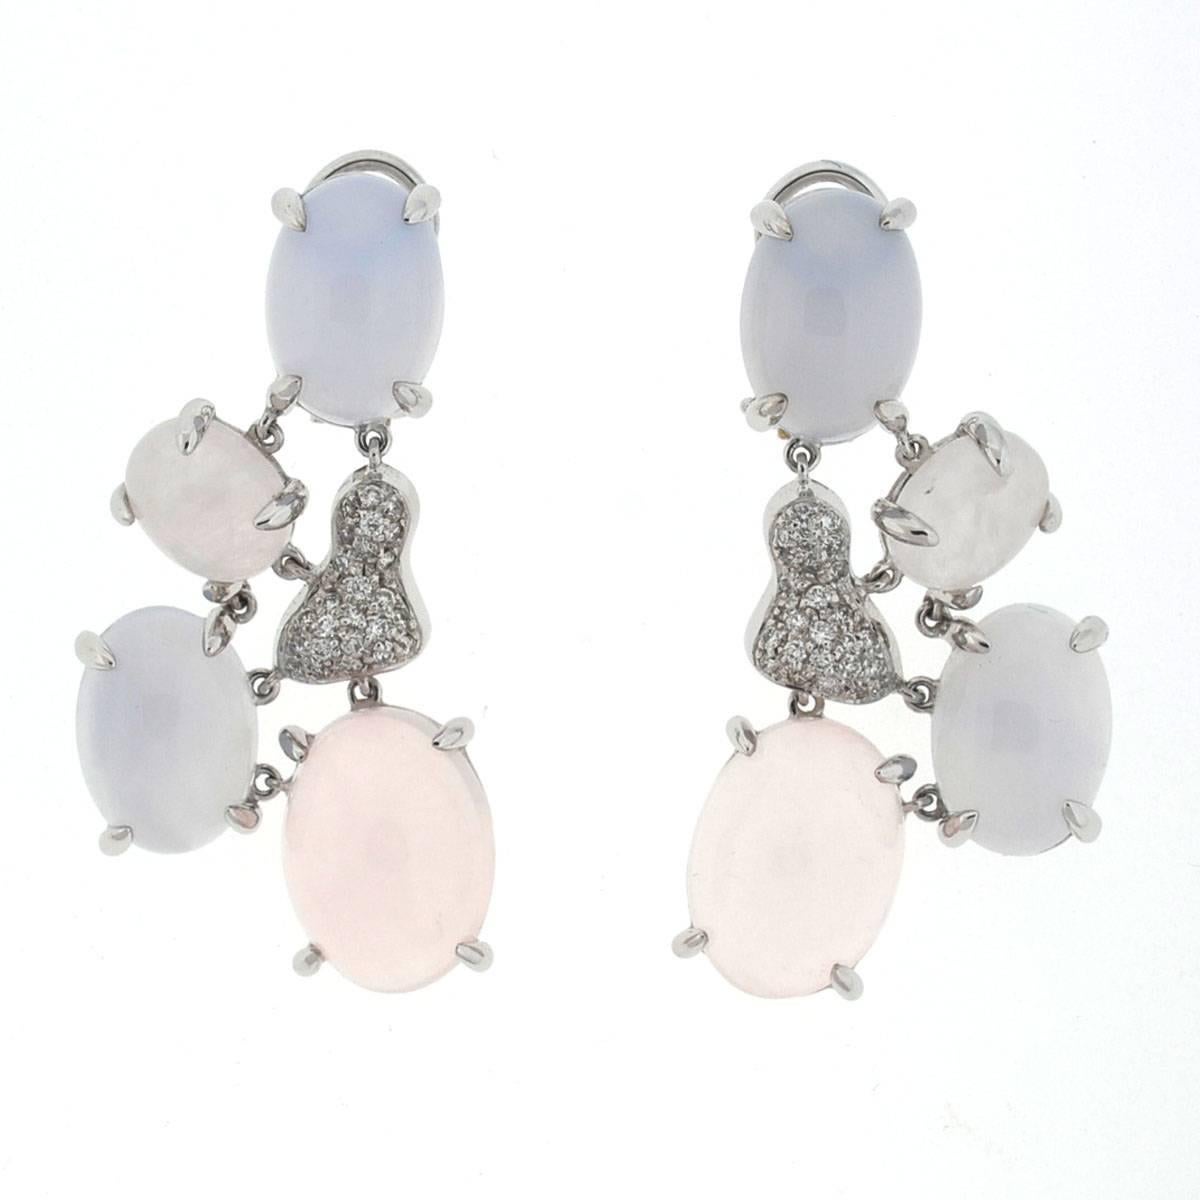 Style - Drop Earrings
Metal - 18k White Gold
Stones - Moonstones and Diamonds
Weight - 22.5 G
Length - 1.5